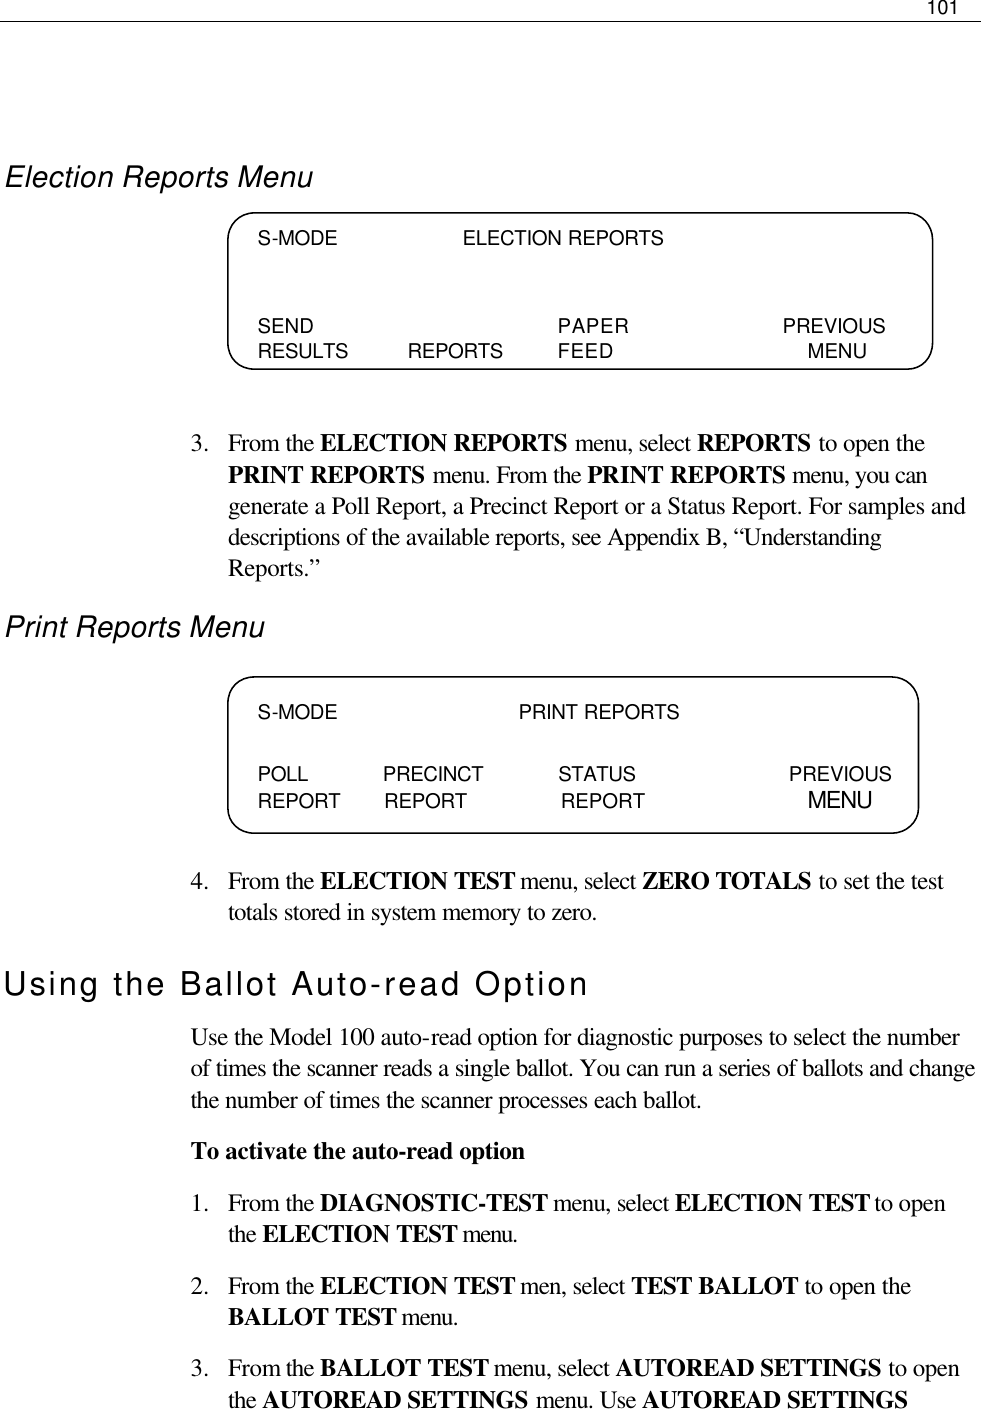     101    Election Reports Menu     3.  From the ELECTION REPORTS menu, select REPORTS to open the PRINT REPORTS menu. From the PRINT REPORTS menu, you can generate a Poll Report, a Precinct Report or a Status Report. For samples and descriptions of the available reports, see Appendix B, “Understanding Reports.” Print Reports Menu     4.  From the ELECTION TEST menu, select ZERO TOTALS to set the test totals stored in system memory to zero. Using the Ballot Auto-read Option Use the Model 100 auto-read option for diagnostic purposes to select the number of times the scanner reads a single ballot. You can run a series of ballots and change the number of times the scanner processes each ballot.  To activate the auto-read option 1.  From the DIAGNOSTIC-TEST menu, select ELECTION TEST to open the ELECTION TEST menu. 2.  From the ELECTION TEST men, select TEST BALLOT to open the BALLOT TEST menu.  3.  From the BALLOT TEST menu, select AUTOREAD SETTINGS to open the AUTOREAD SETTINGS menu. Use AUTOREAD SETTINGS S-MODE                    ELECTION REPORTS   SEND    PAPER   PREVIOUS RESULTS REPORTS FEED       MENU  S-MODE                             PRINT REPORTS  POLL            PRECINCT            STATUS     PREVIOUS REPORT       REPORT               REPORT           MENU 